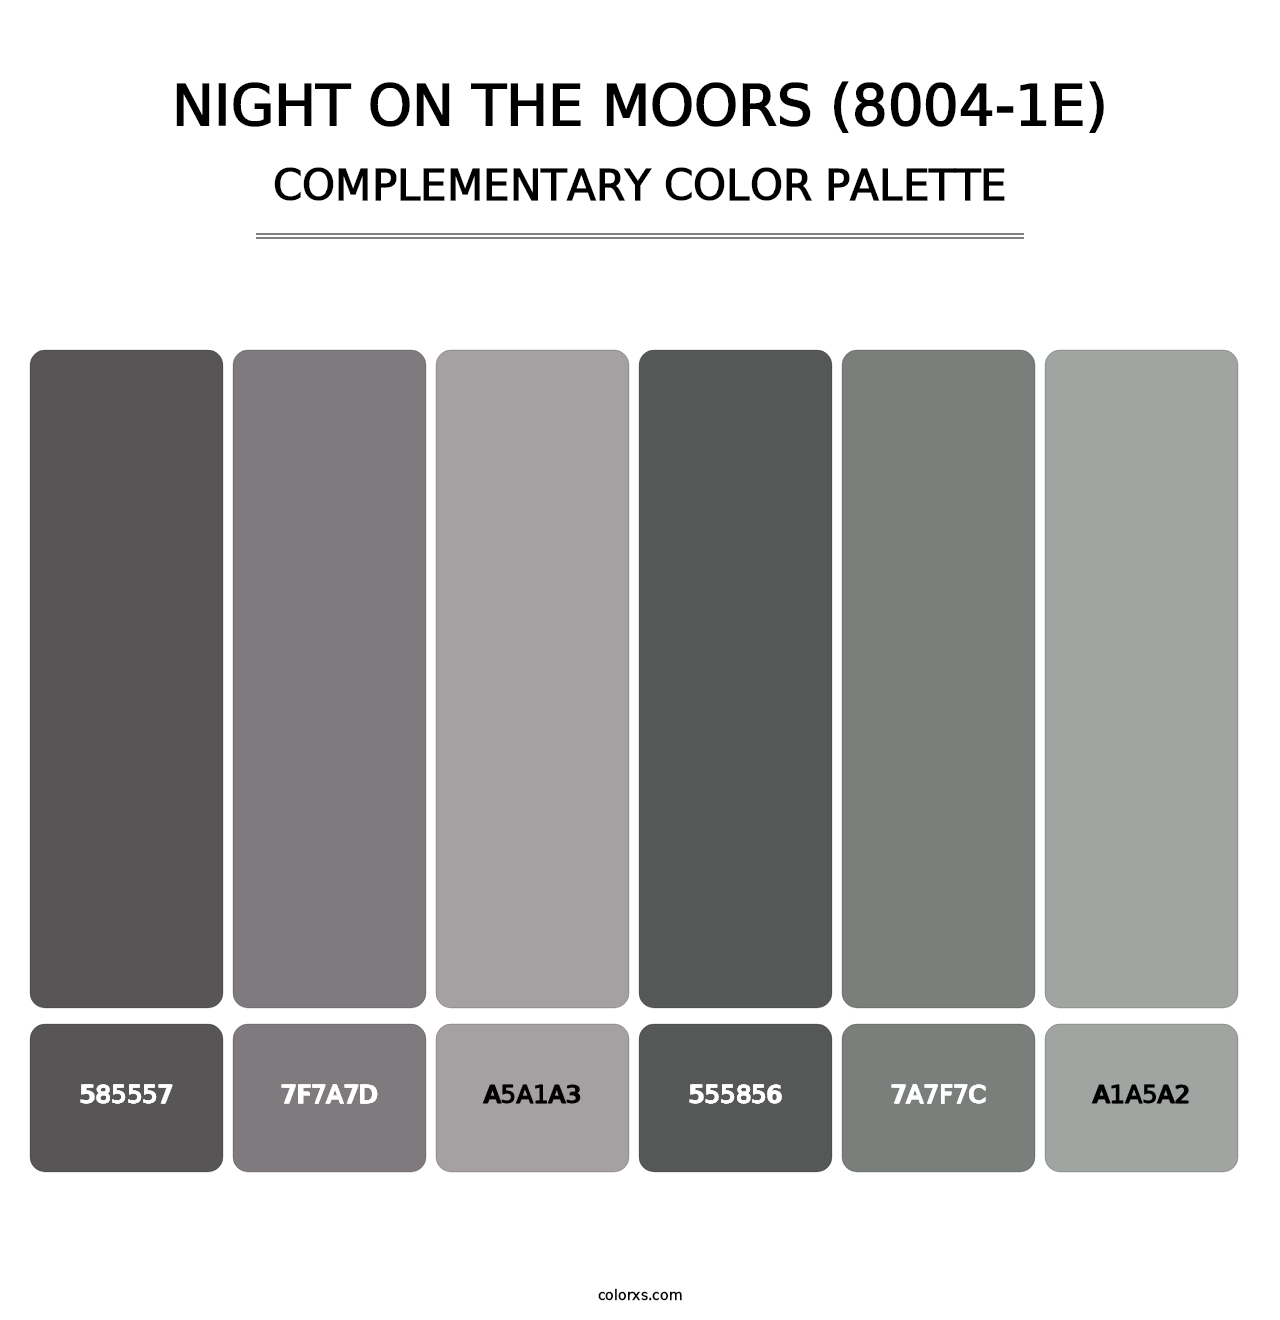 Night on the Moors (8004-1E) - Complementary Color Palette